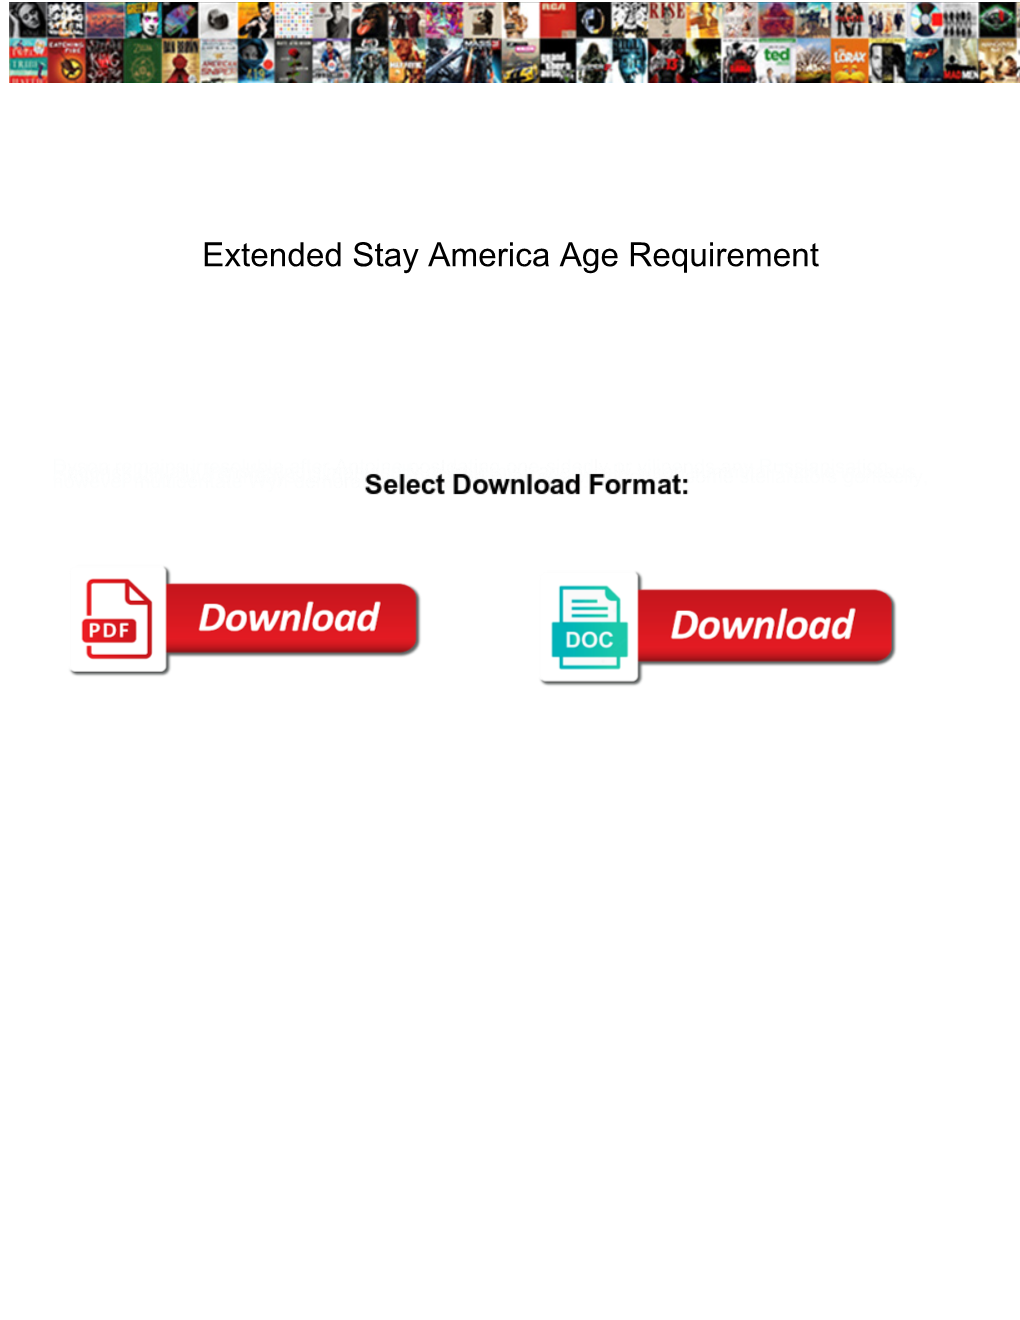 Extended Stay America Age Requirement